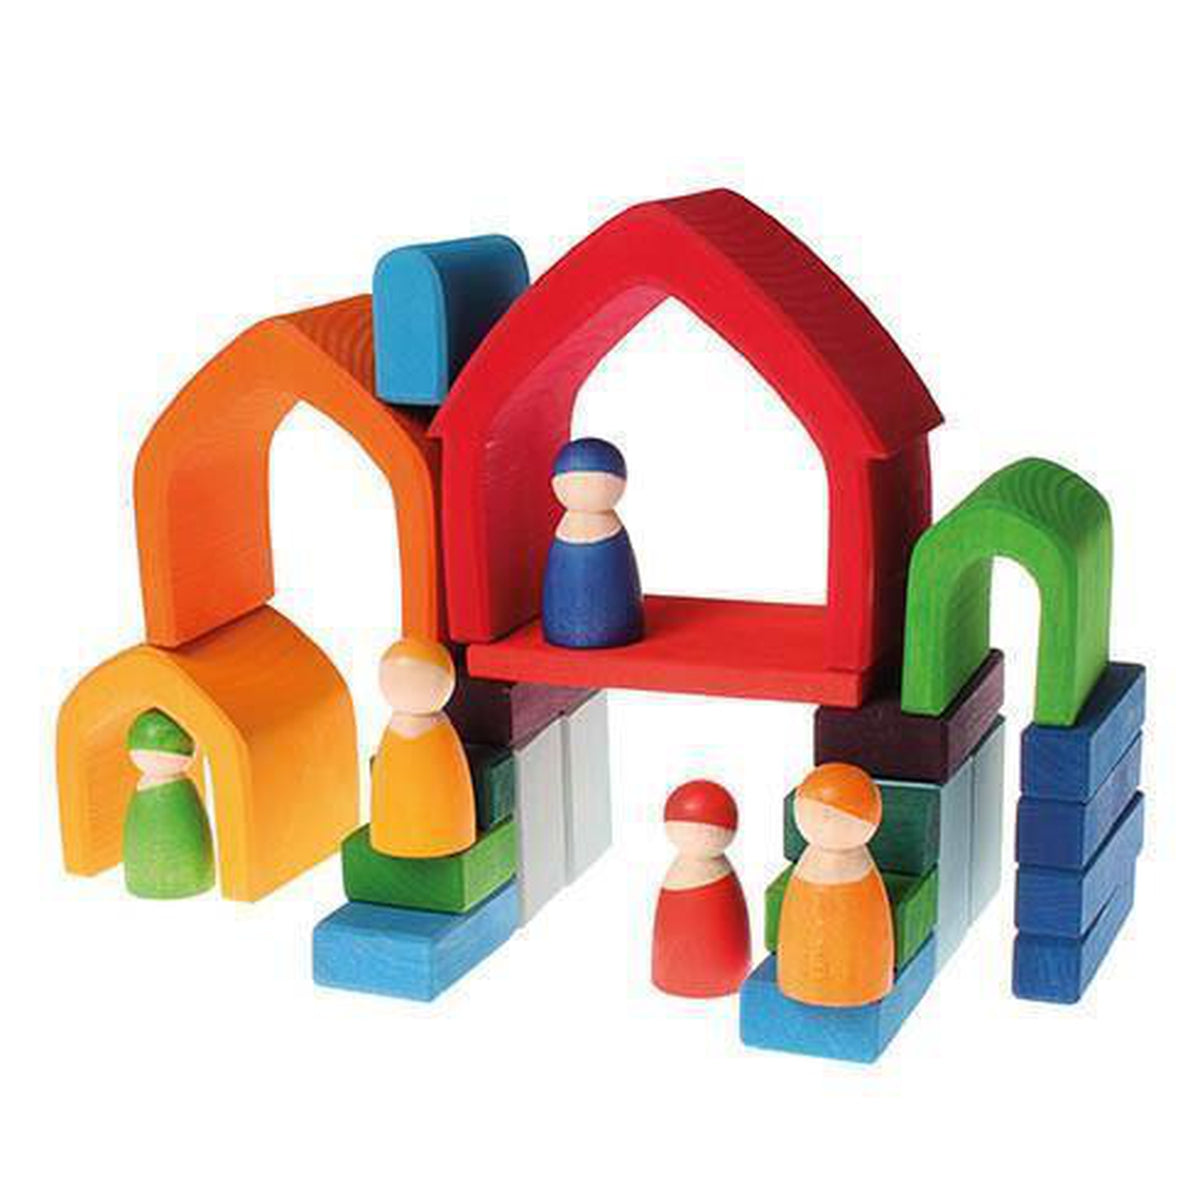 Grimm's rainbow house stacker-blocks & building sets-Fire the Imagination-Dilly Dally Kids